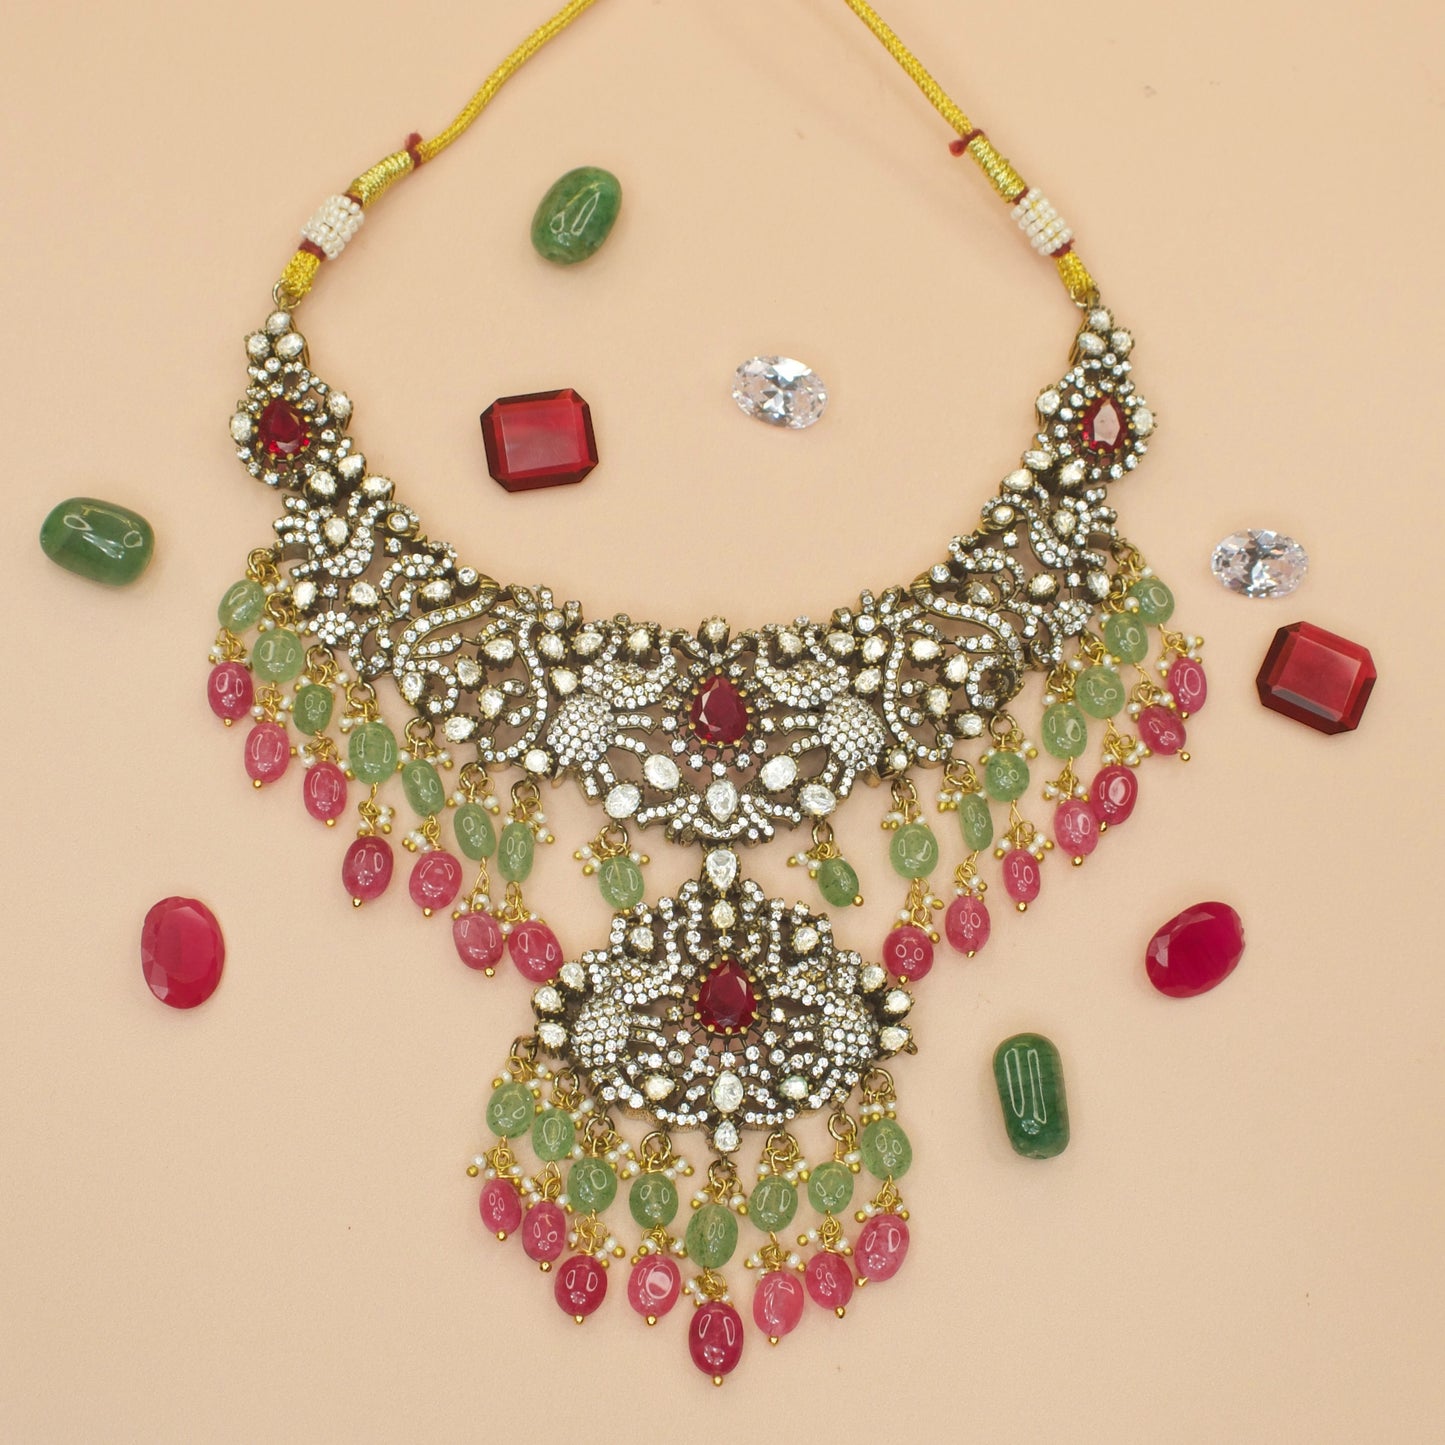 Antique Victorian Polki Necklace with chandbali earrings